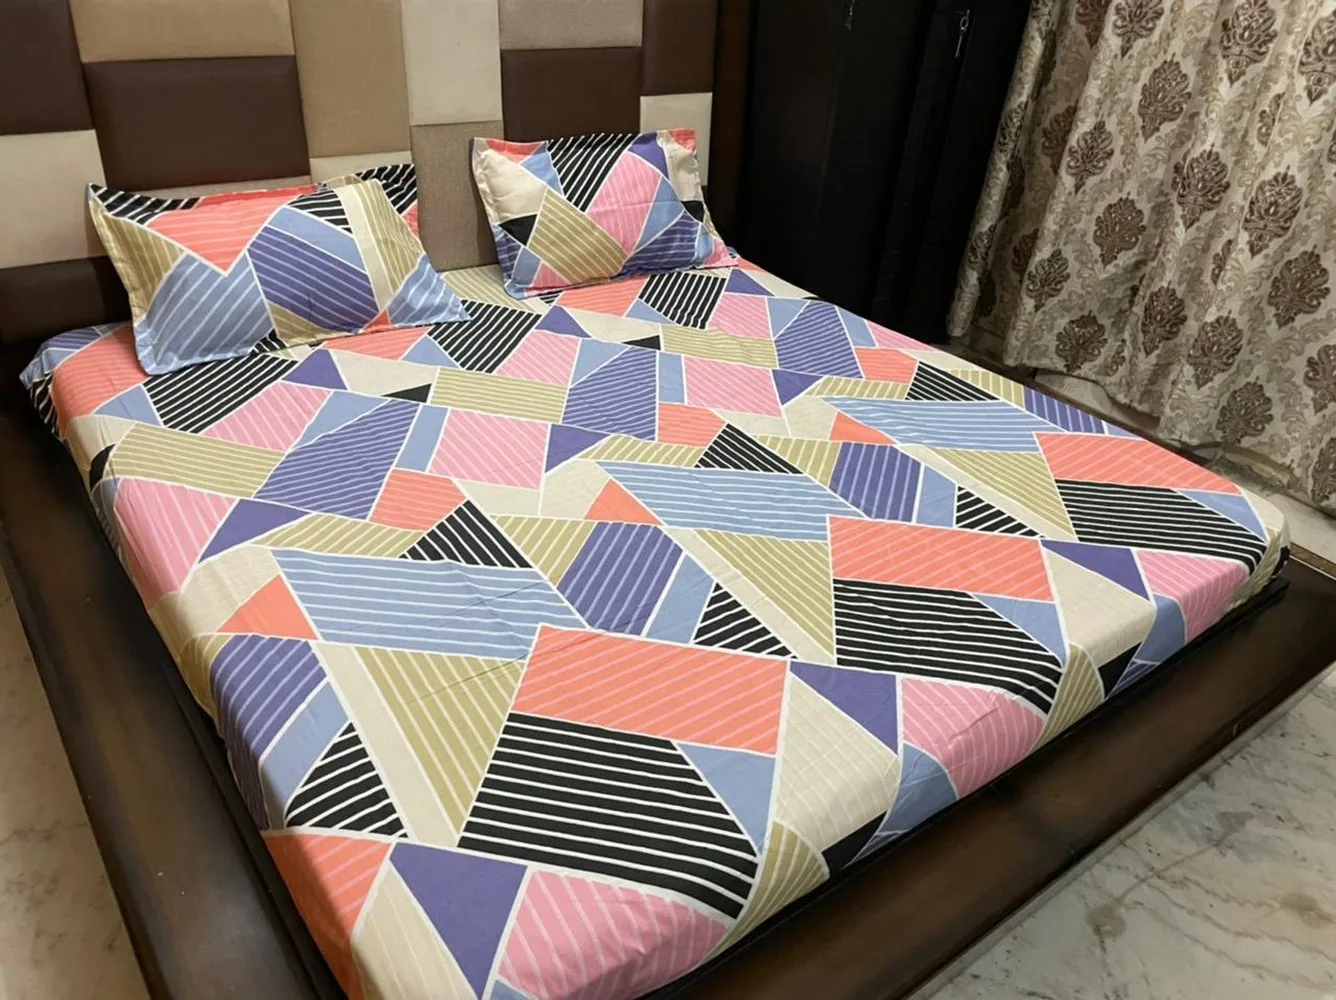 Bedsheet printed, Fitted, Elastic Corner, 90x100, Glace Cotton, 2 Pillow Covers, Pink, Blue, Black, Shapes, Lines